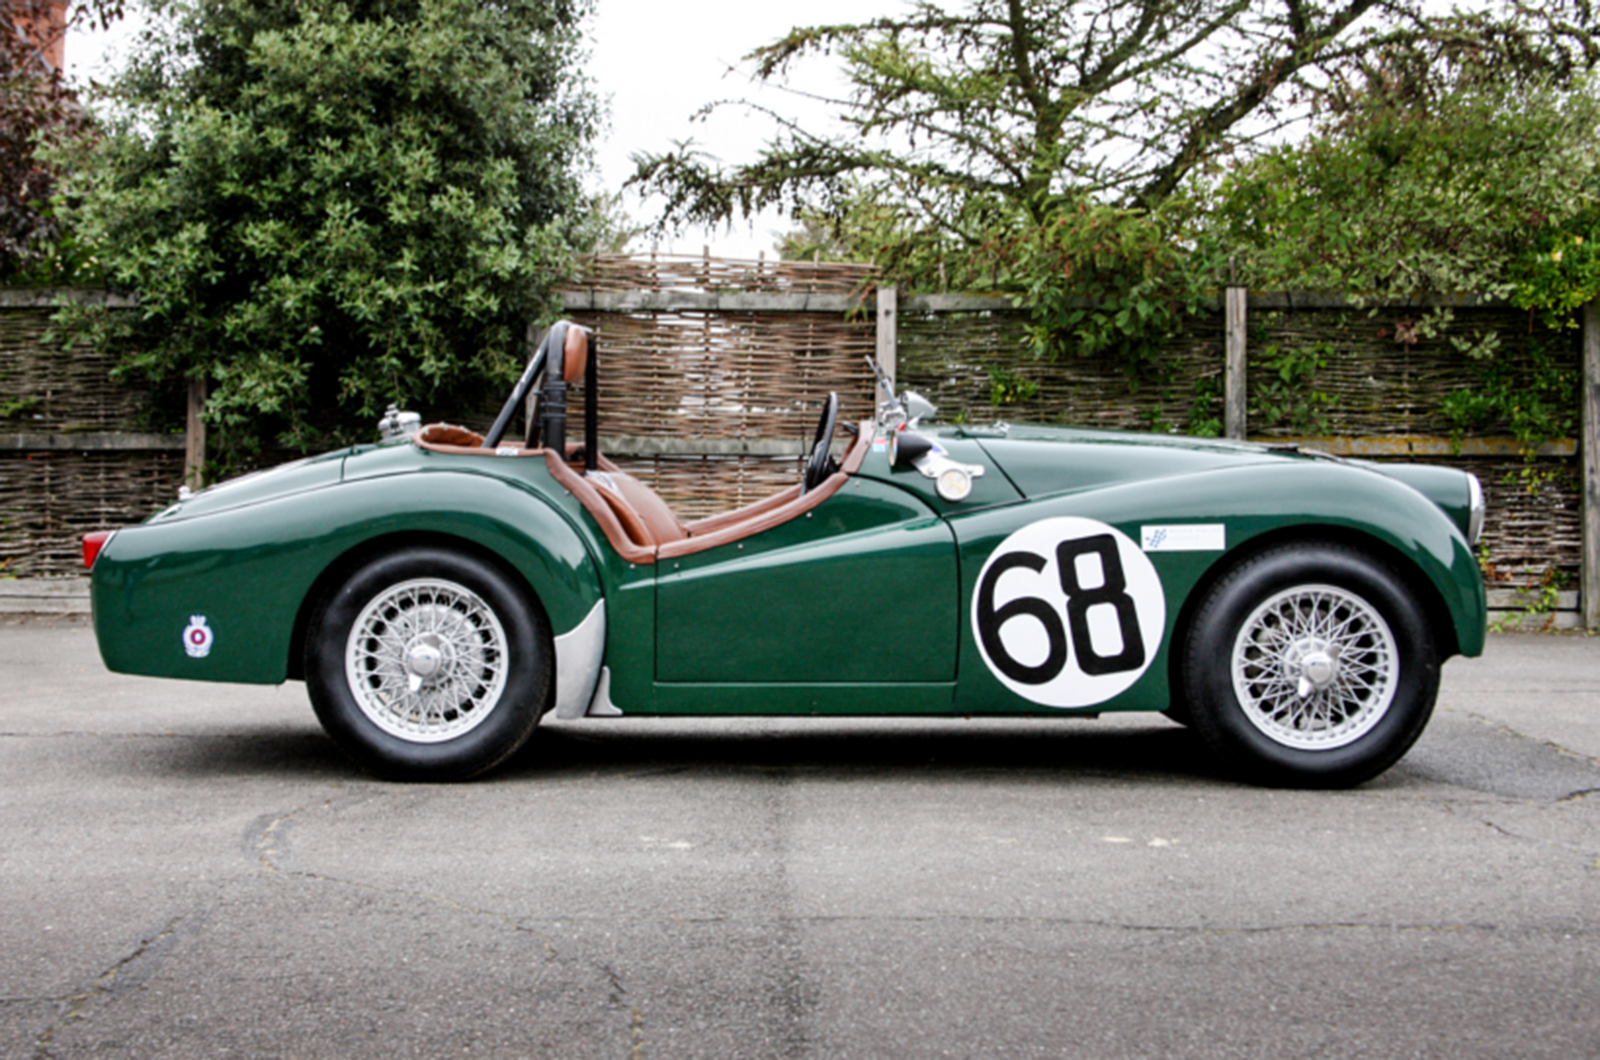 Classic & Sports Car – Ex-works Triumph TR2 for sale for the first time in 47 years